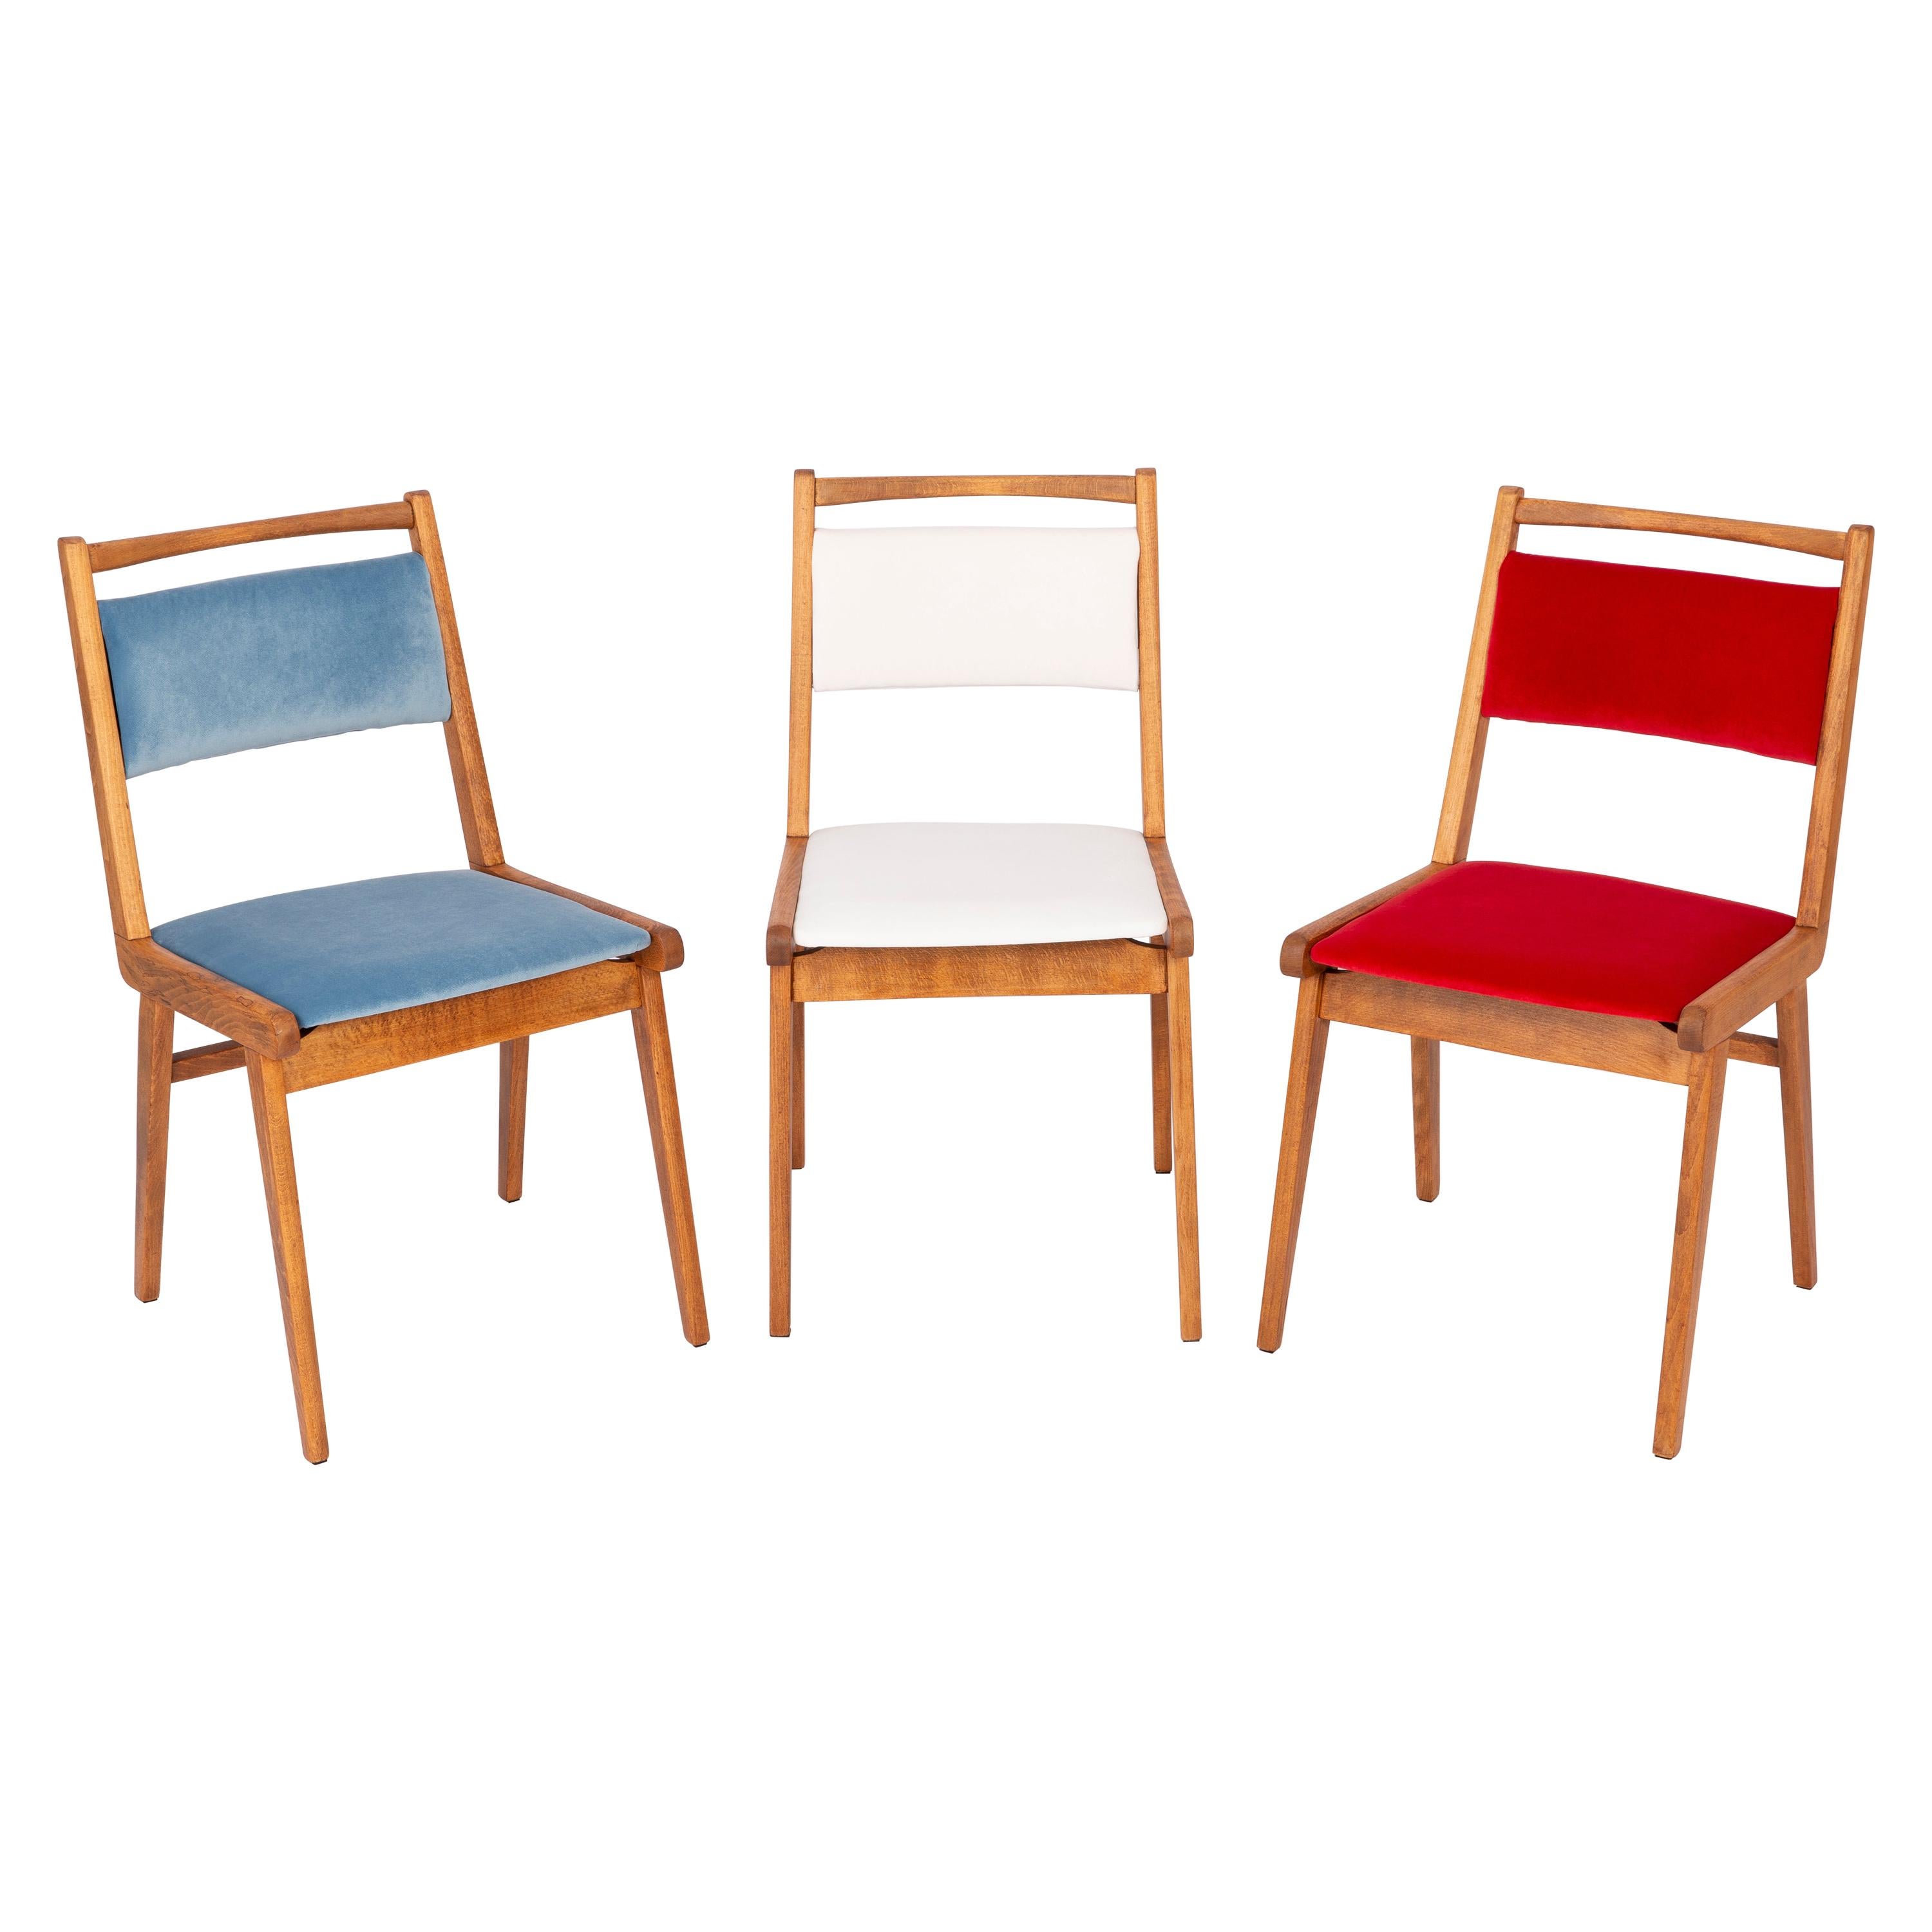 Set of Three 20th Century Blue White and Red Velvet Chairs, Poland, 1960s For Sale